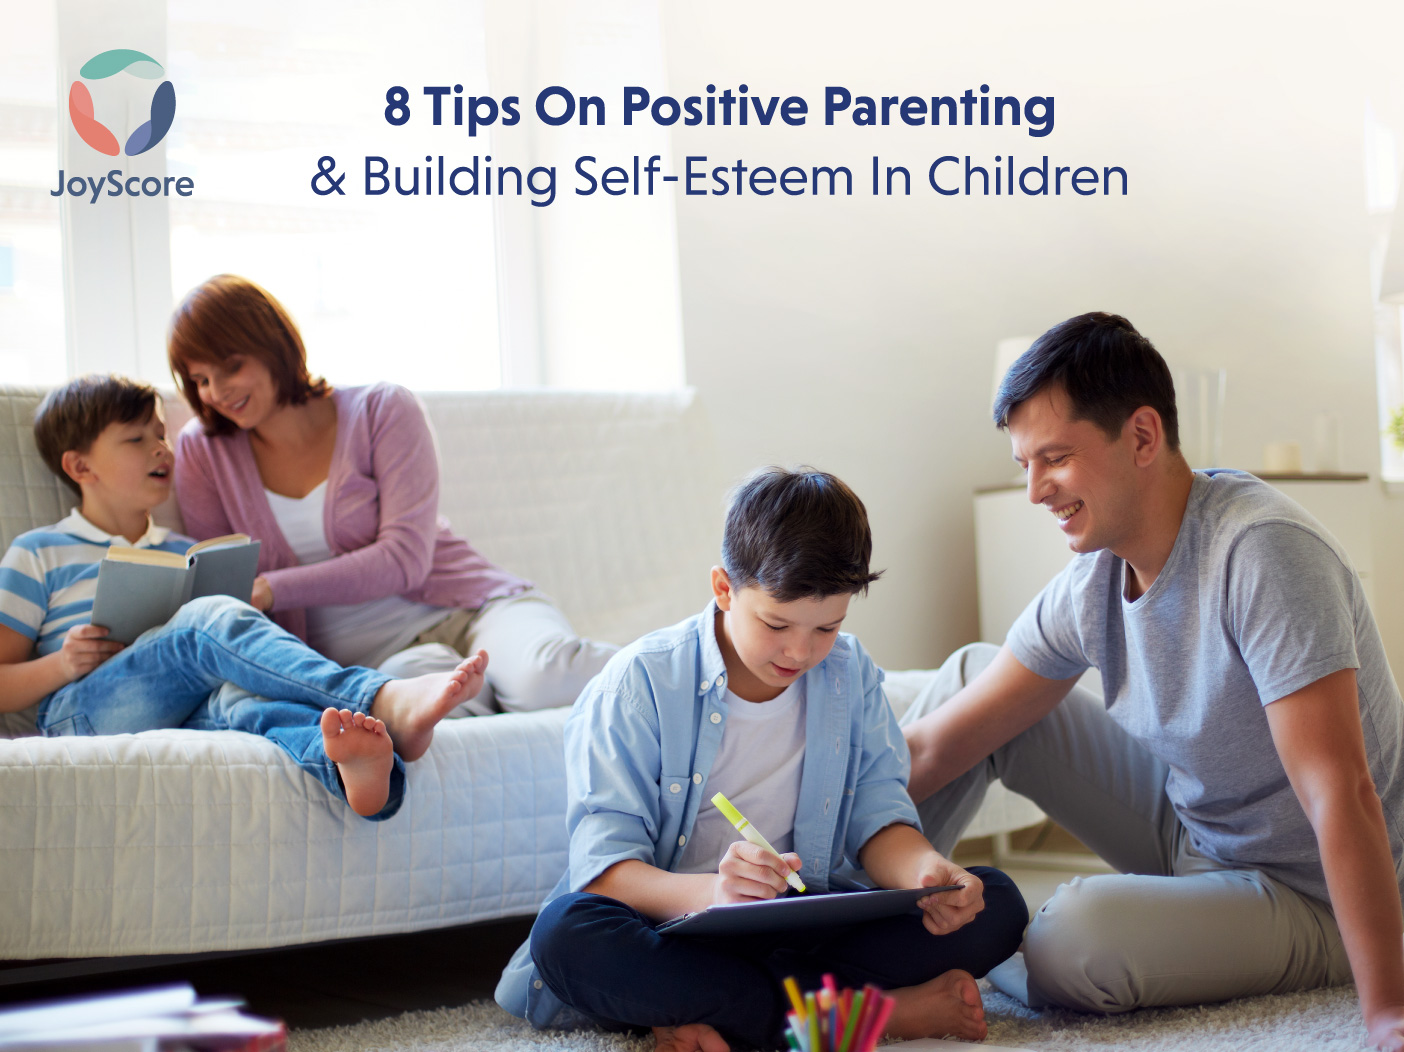 8 Tips On Positive Parenting And How To Build High Self-Esteem In Children